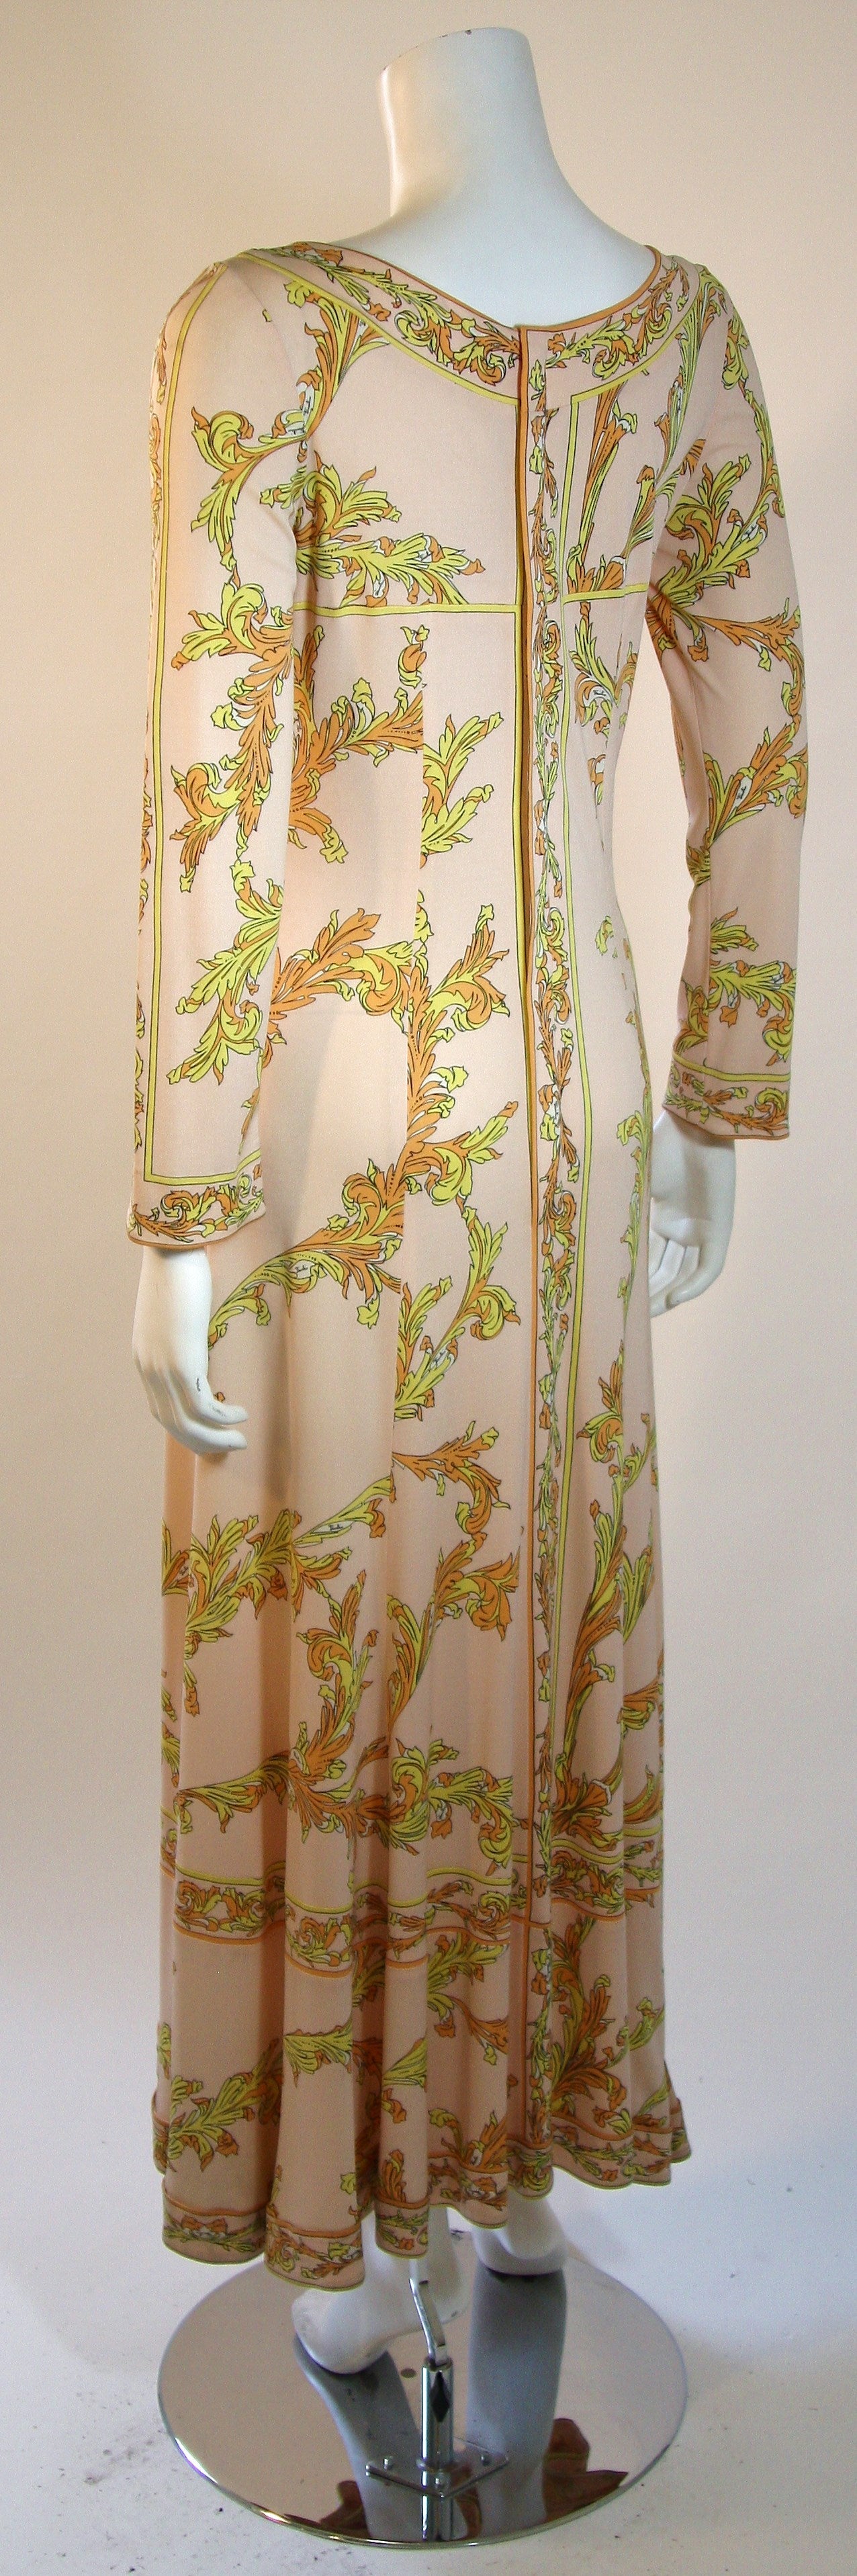 Emilio Pucci 1970s Peach with Yellow print silk jersey empire gown In Excellent Condition For Sale In Los Angeles, CA